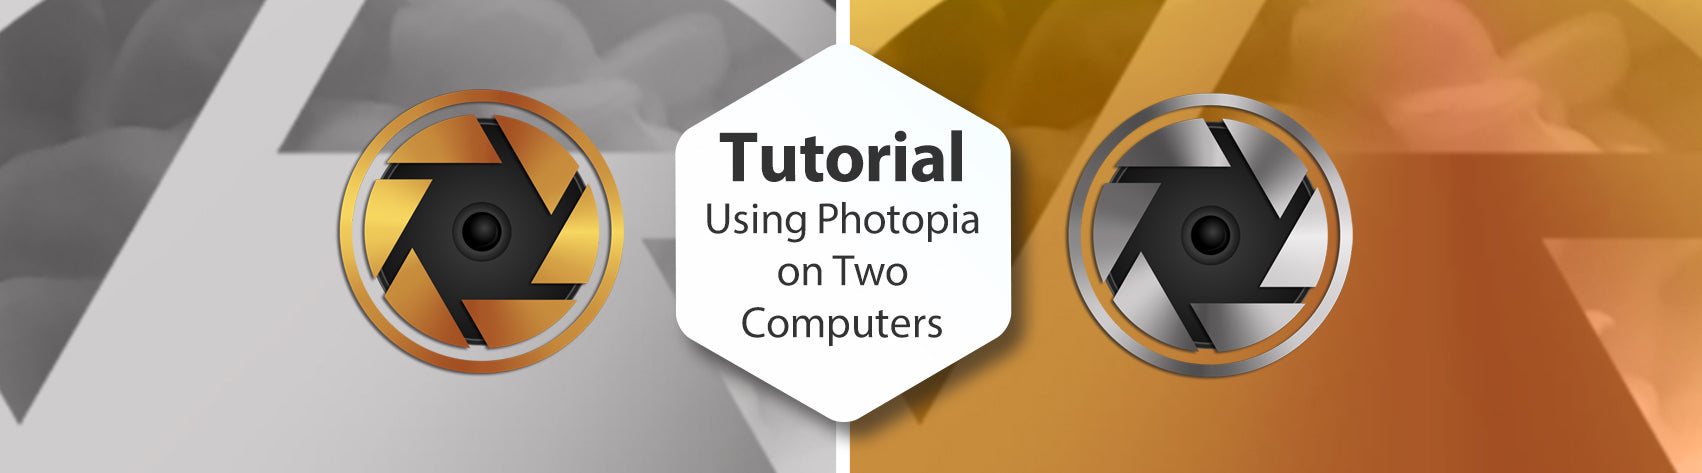 Using Photopia on Two Computers